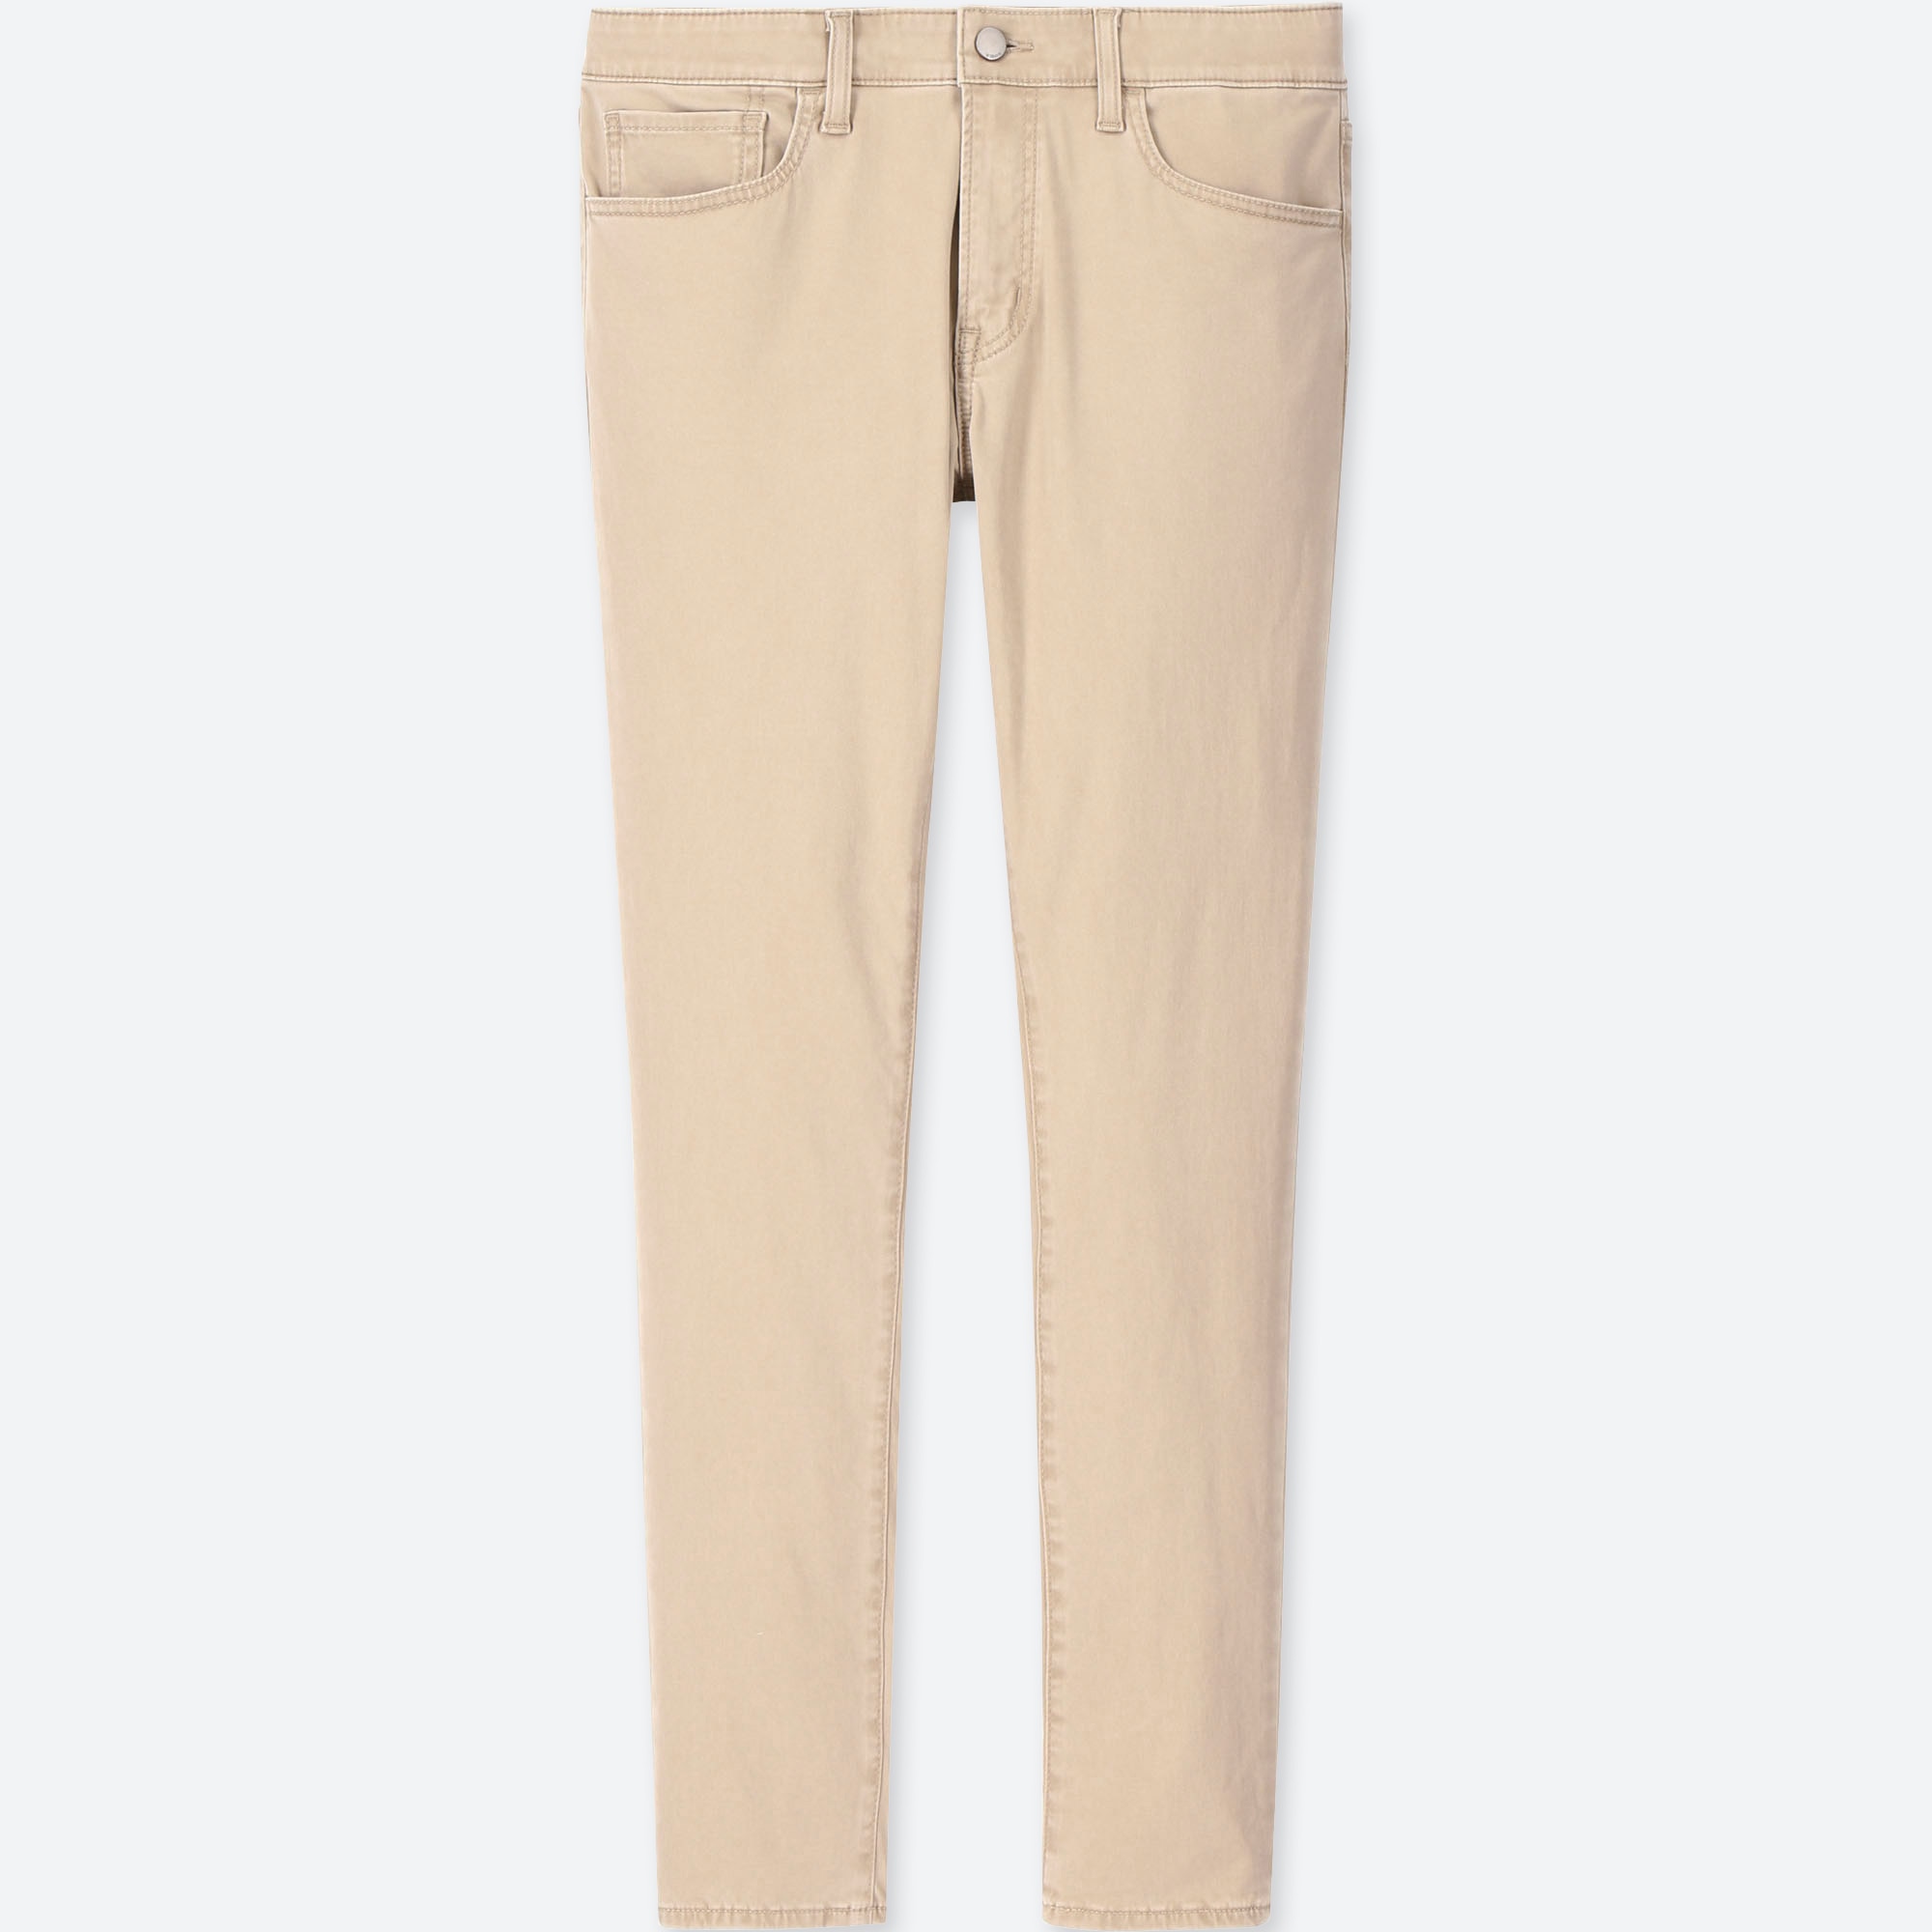 ezy skinny fit colored jeans